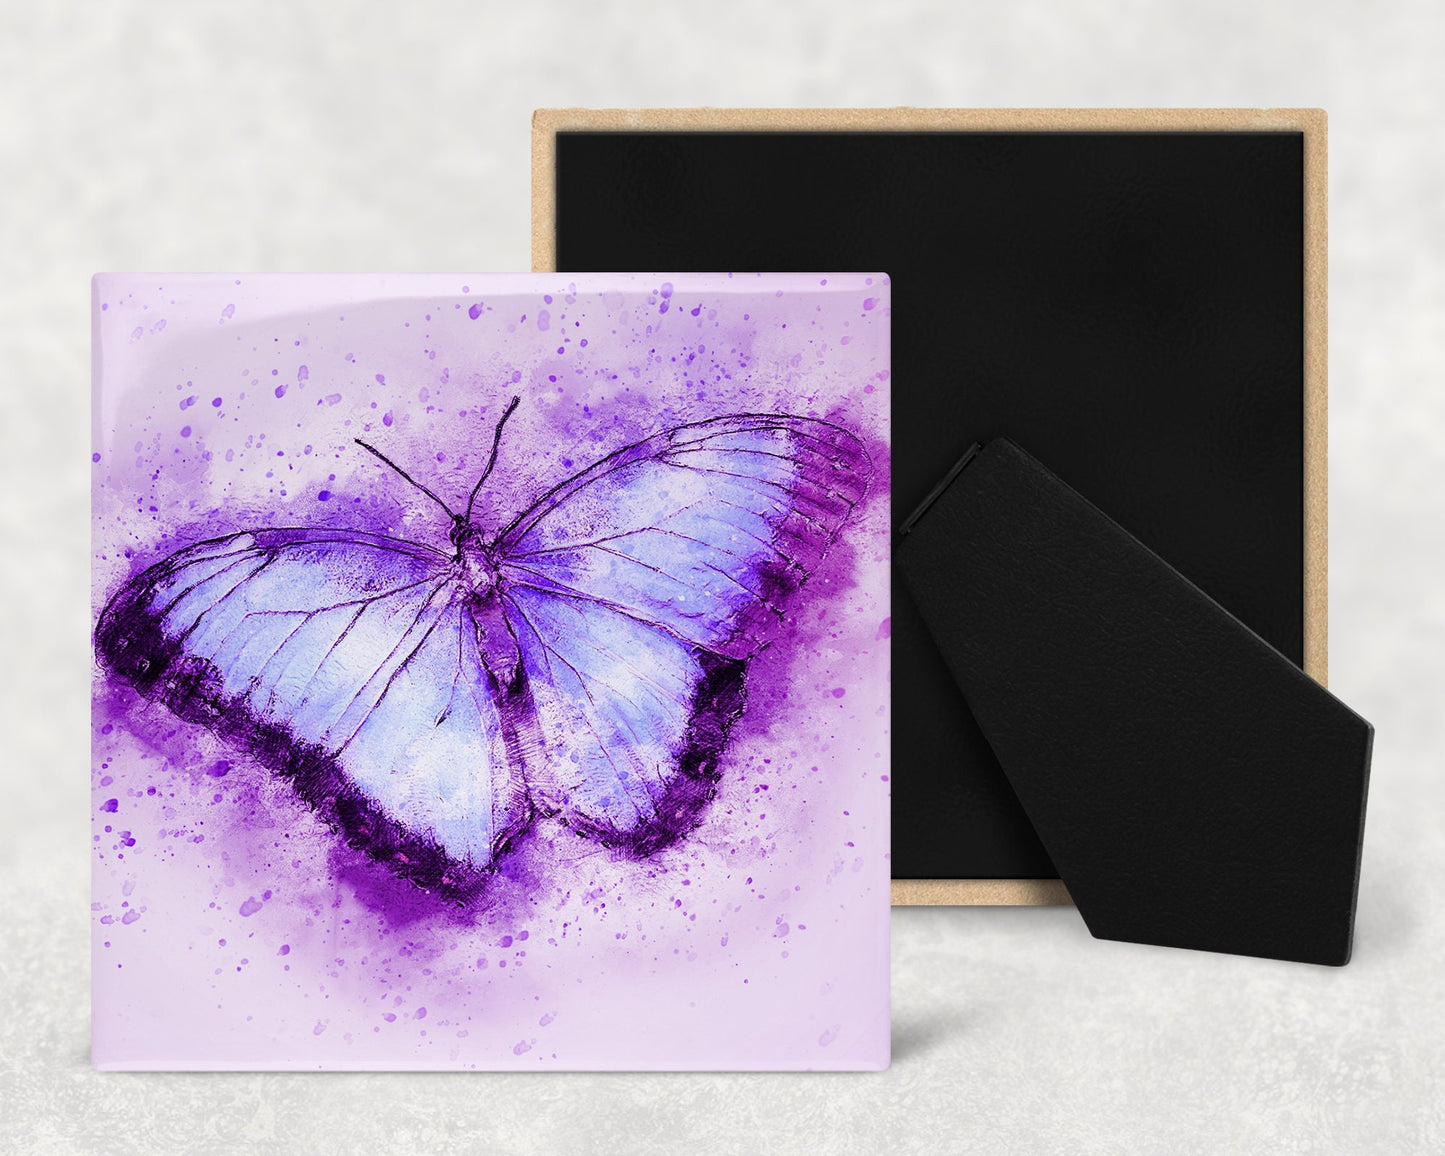 Watercolor Purple Butterfly Art Decorative Ceramic Tile with Optional Easel Back - Available in 3 Sizes